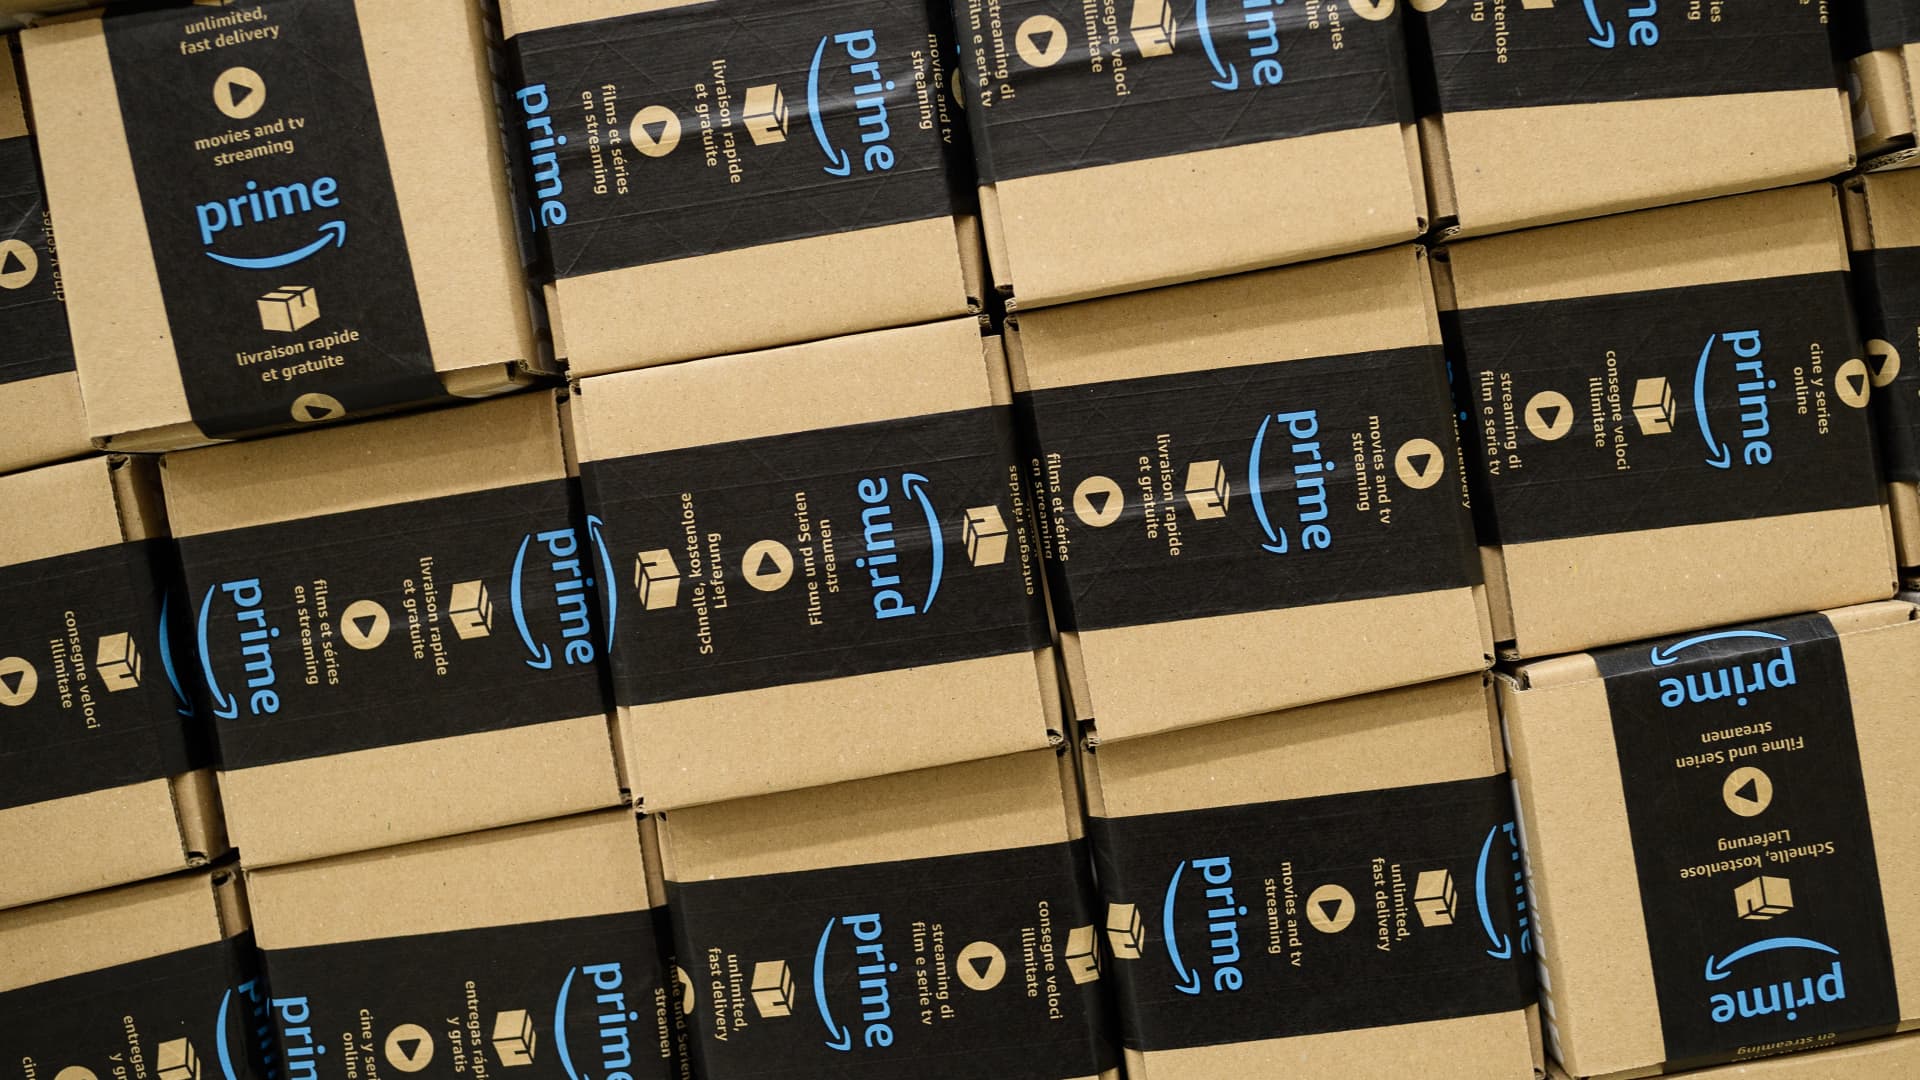 Amazon opens up Prime delivery service to other retailers in its latest move to compete with FedEx and UPS - CNBC